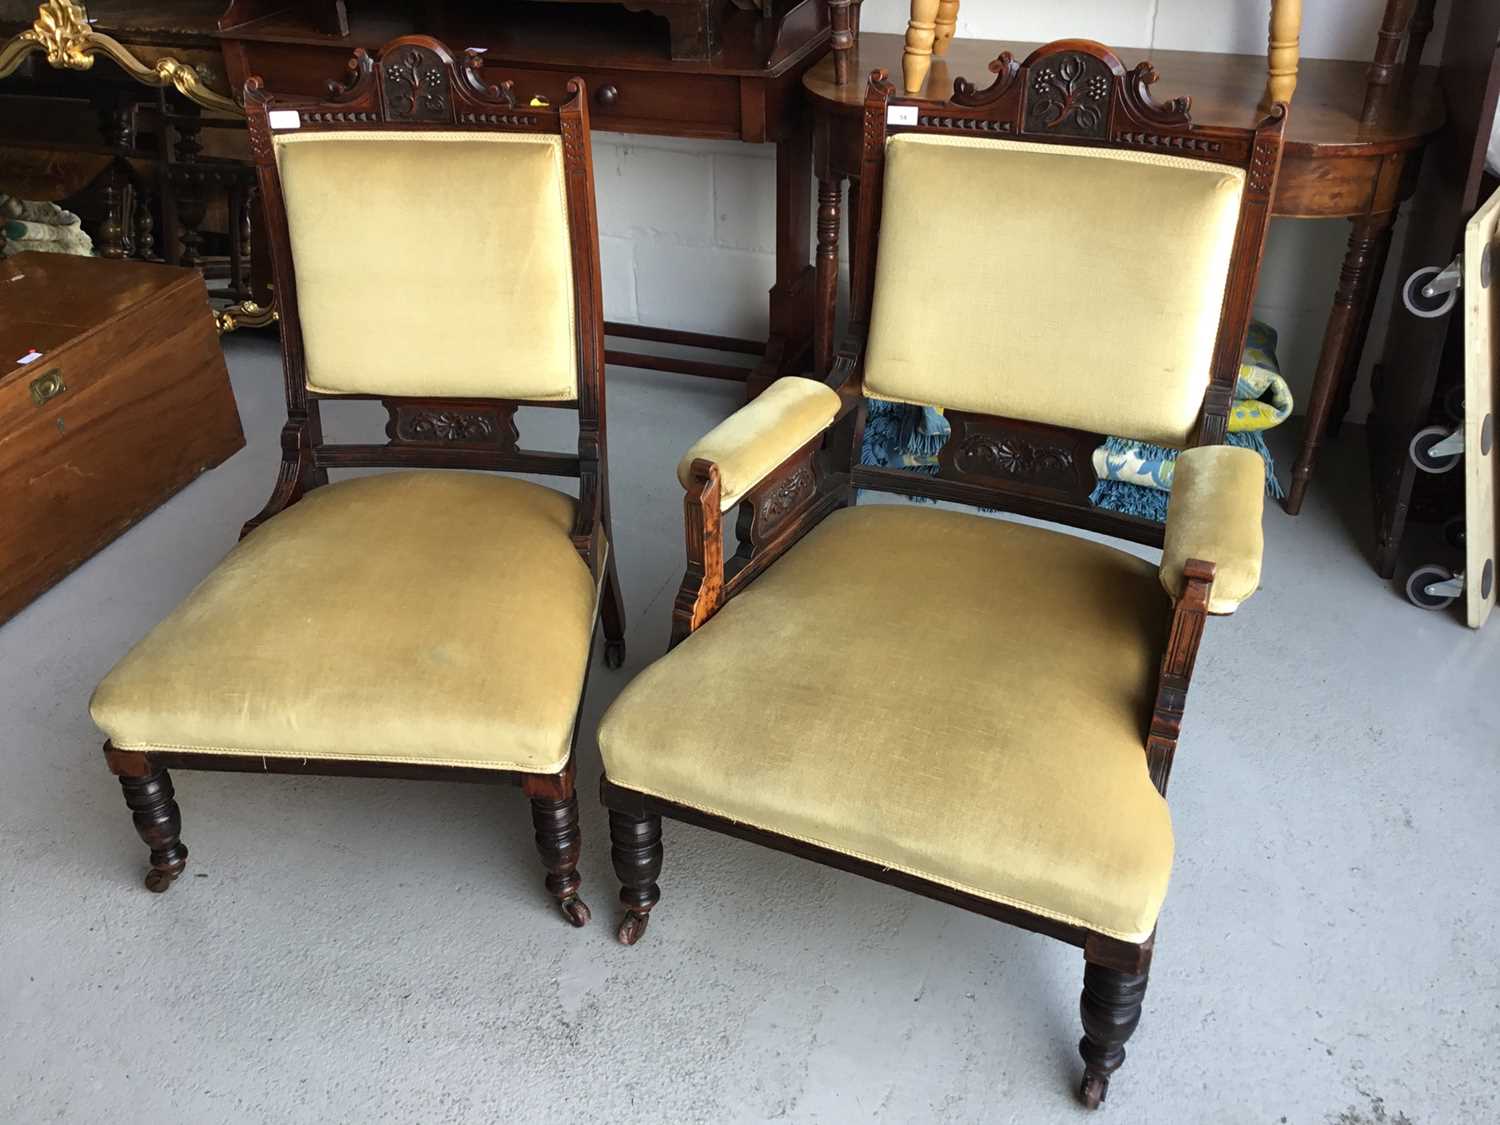 Edwardian carved wood armchair with green velvet upholstery and padded arms, on turned legs together